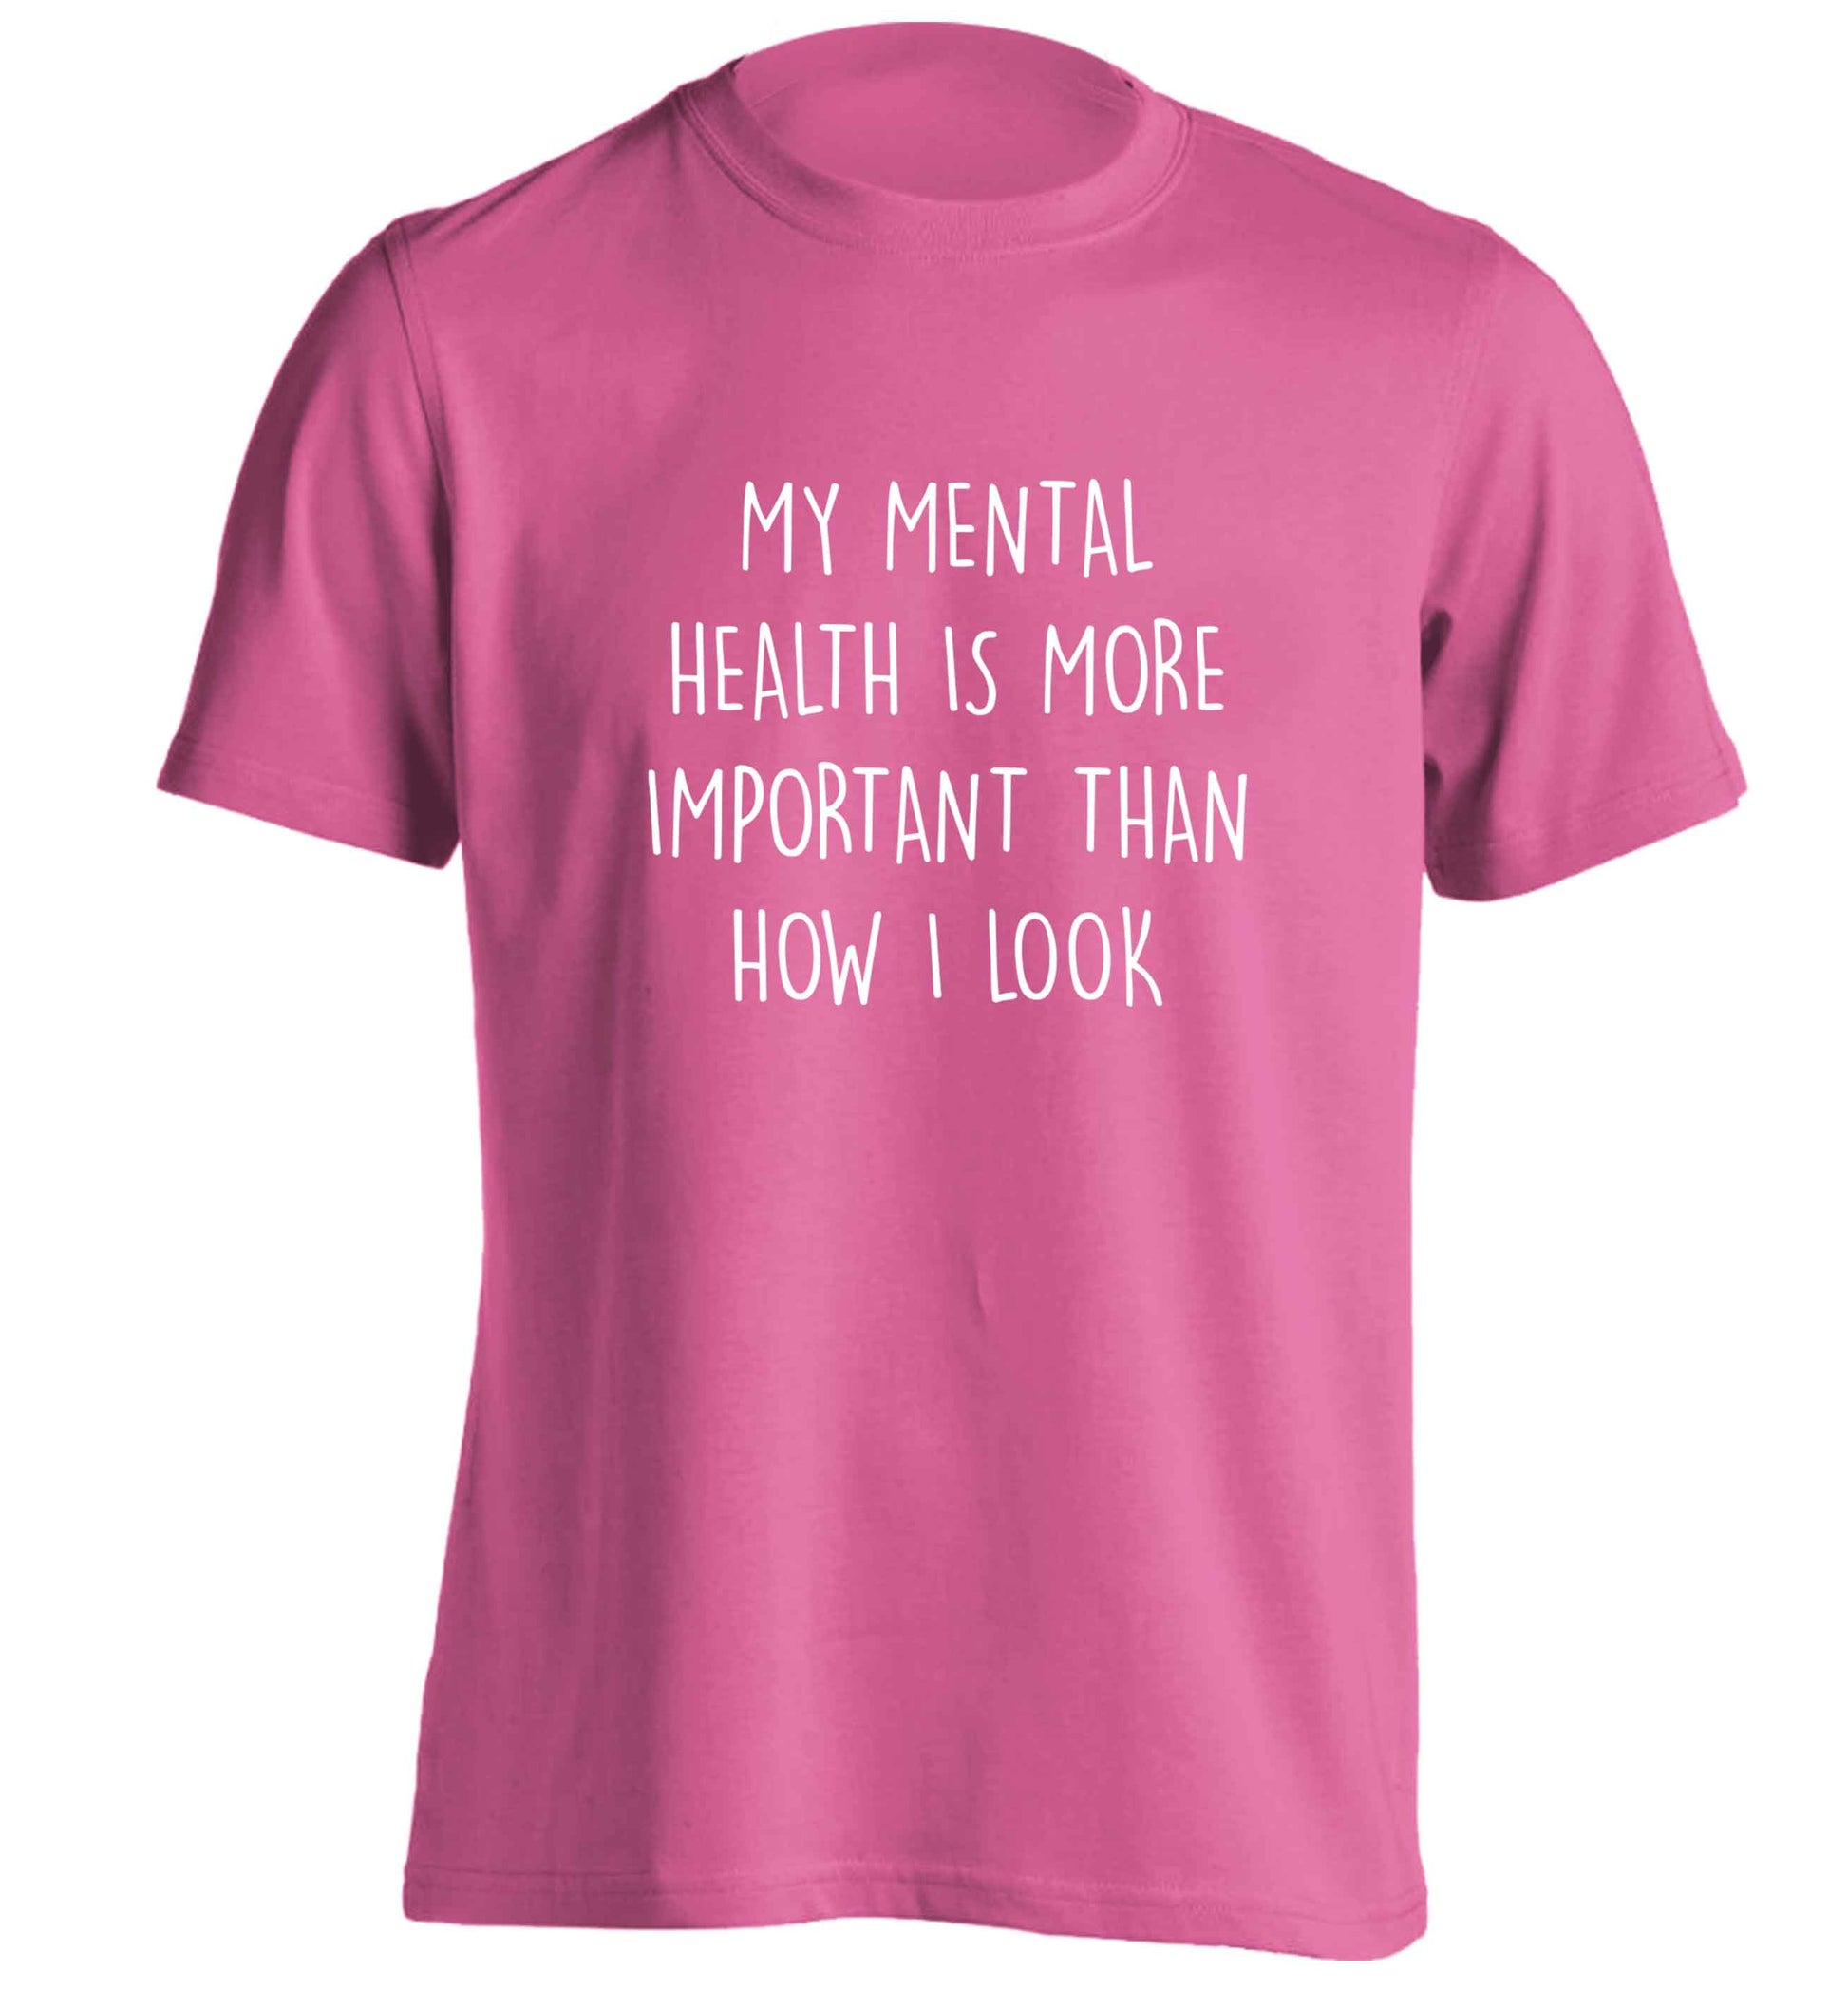 My mental health is more importnat than how I look adults unisex pink Tshirt 2XL